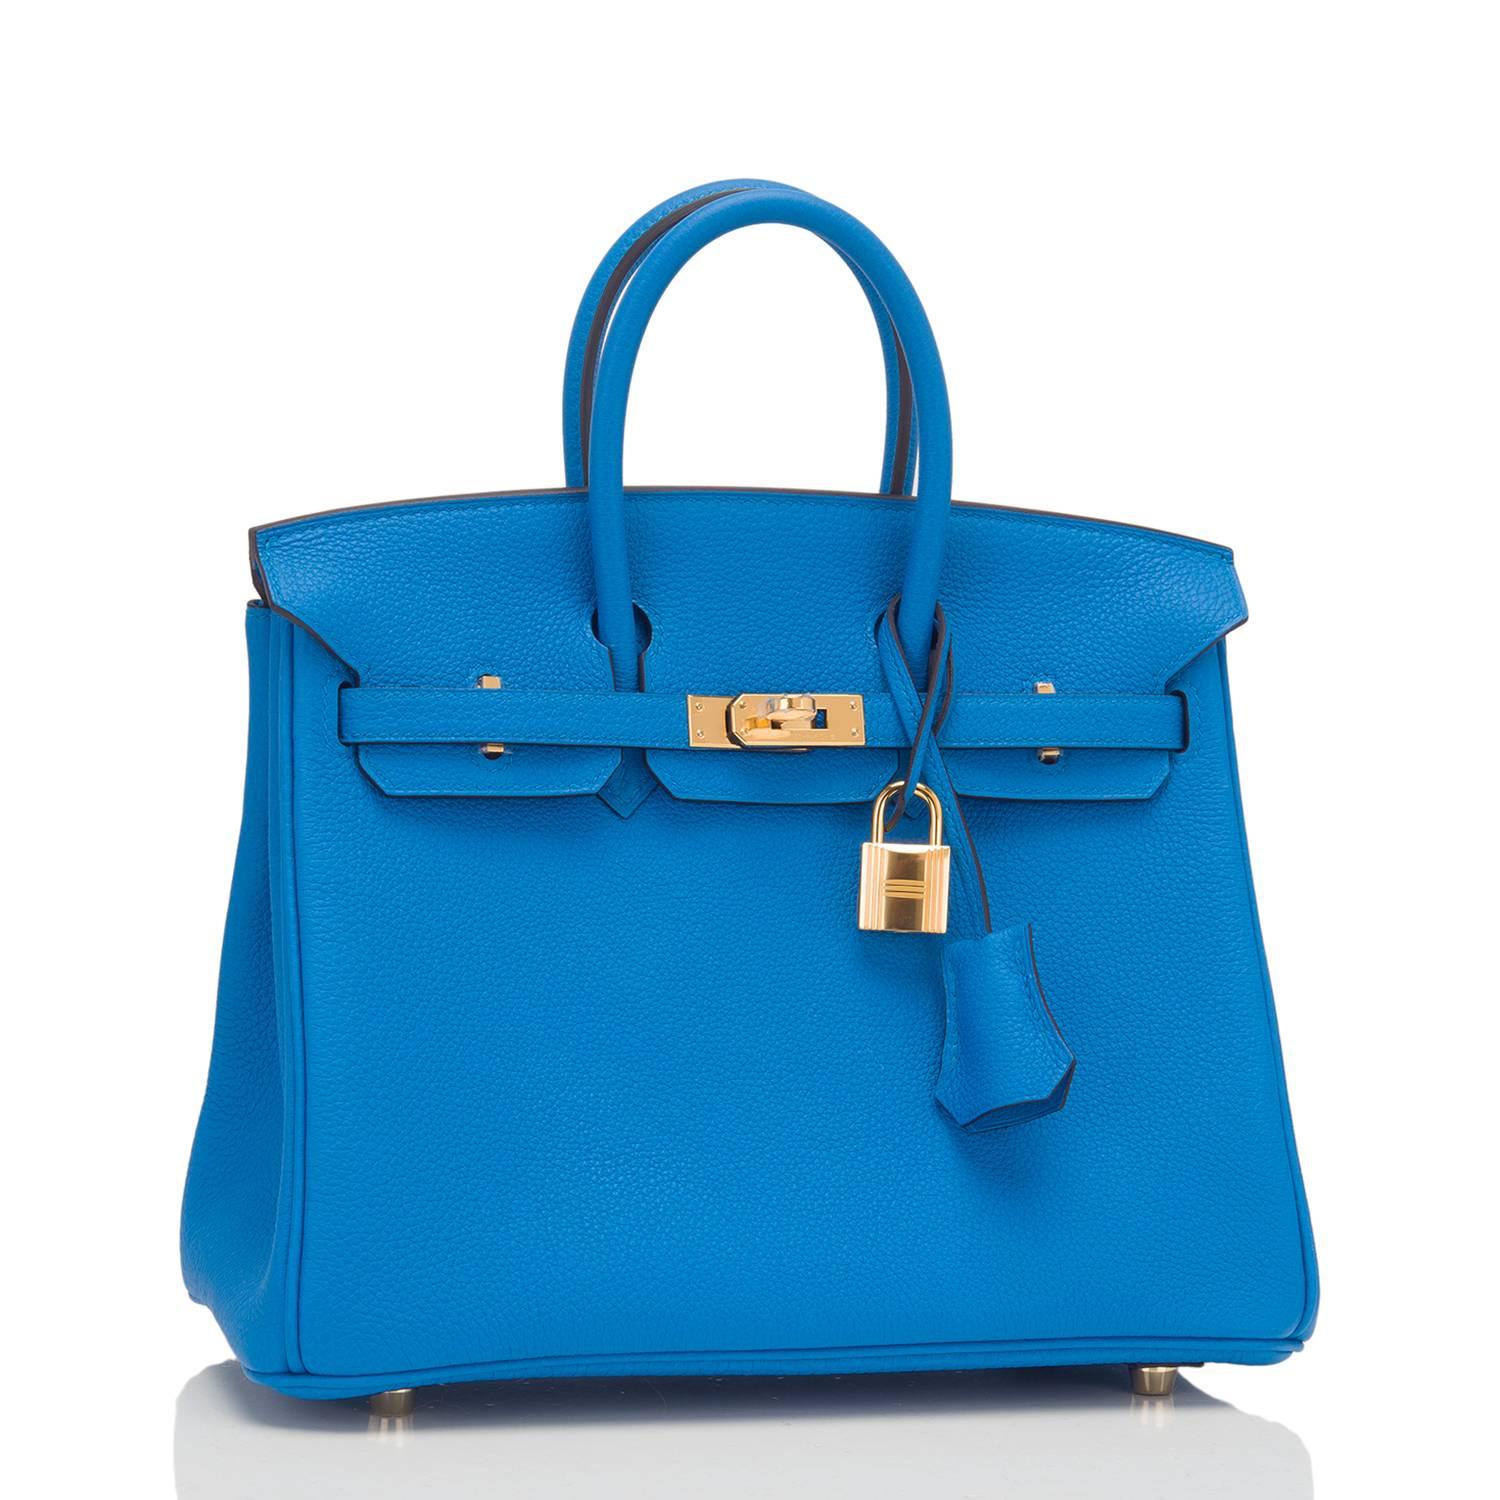 Hermes Blue Zanzibar Birkin 25cm of togo leather with gold hardware.

This Birkin has tonal stitching, a front toggle closure, a clochette with lock and two keys, and double rolled handles.

The interior is lined with Blue Zanzibar chevre and has